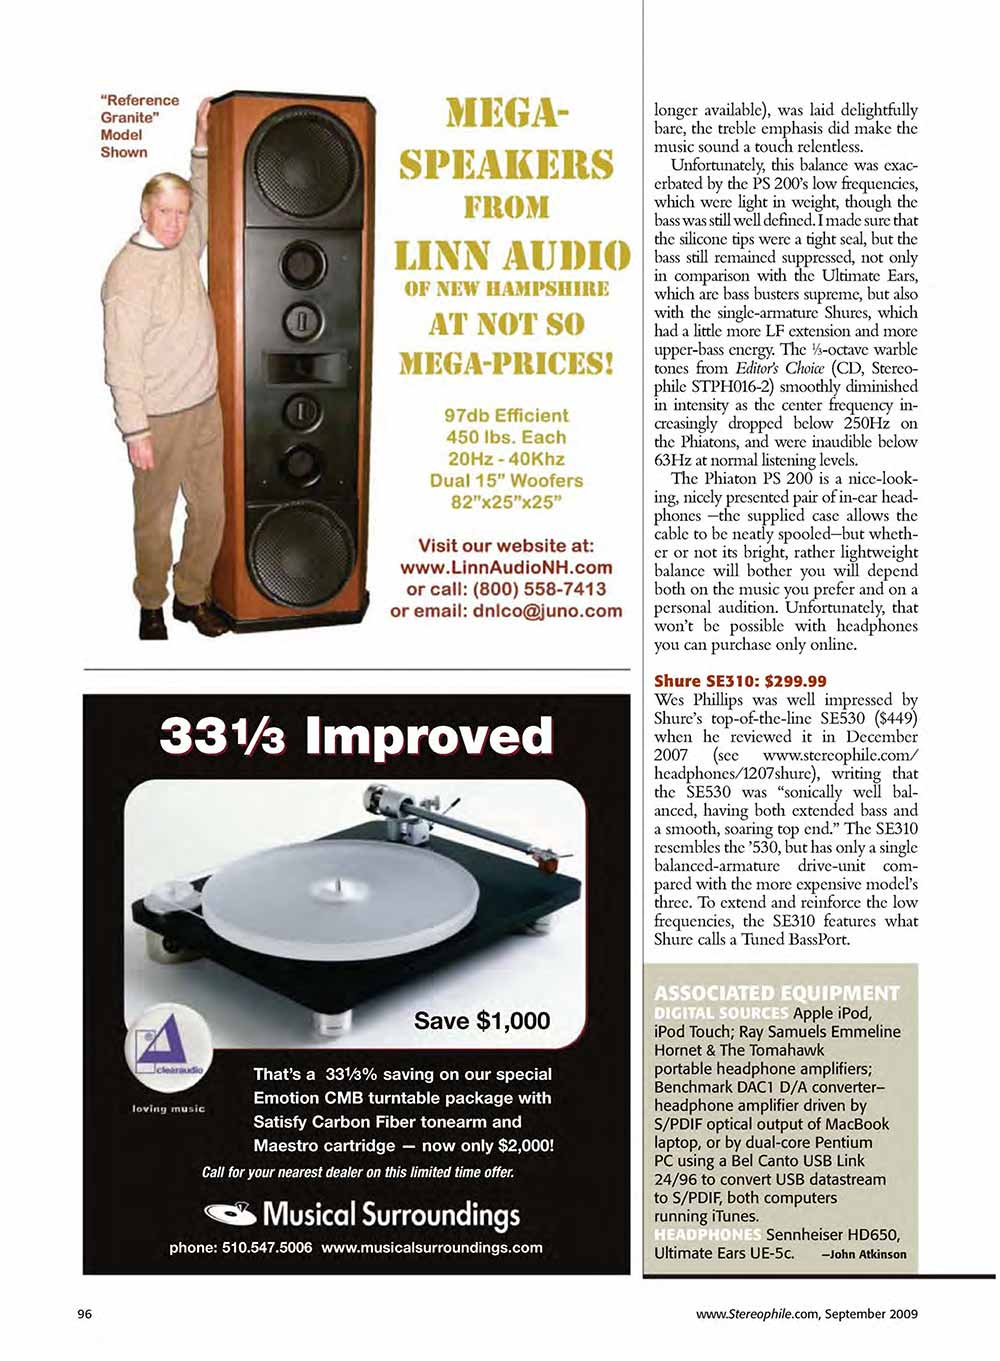 Stereophile-2009-09_Page_096.jpg